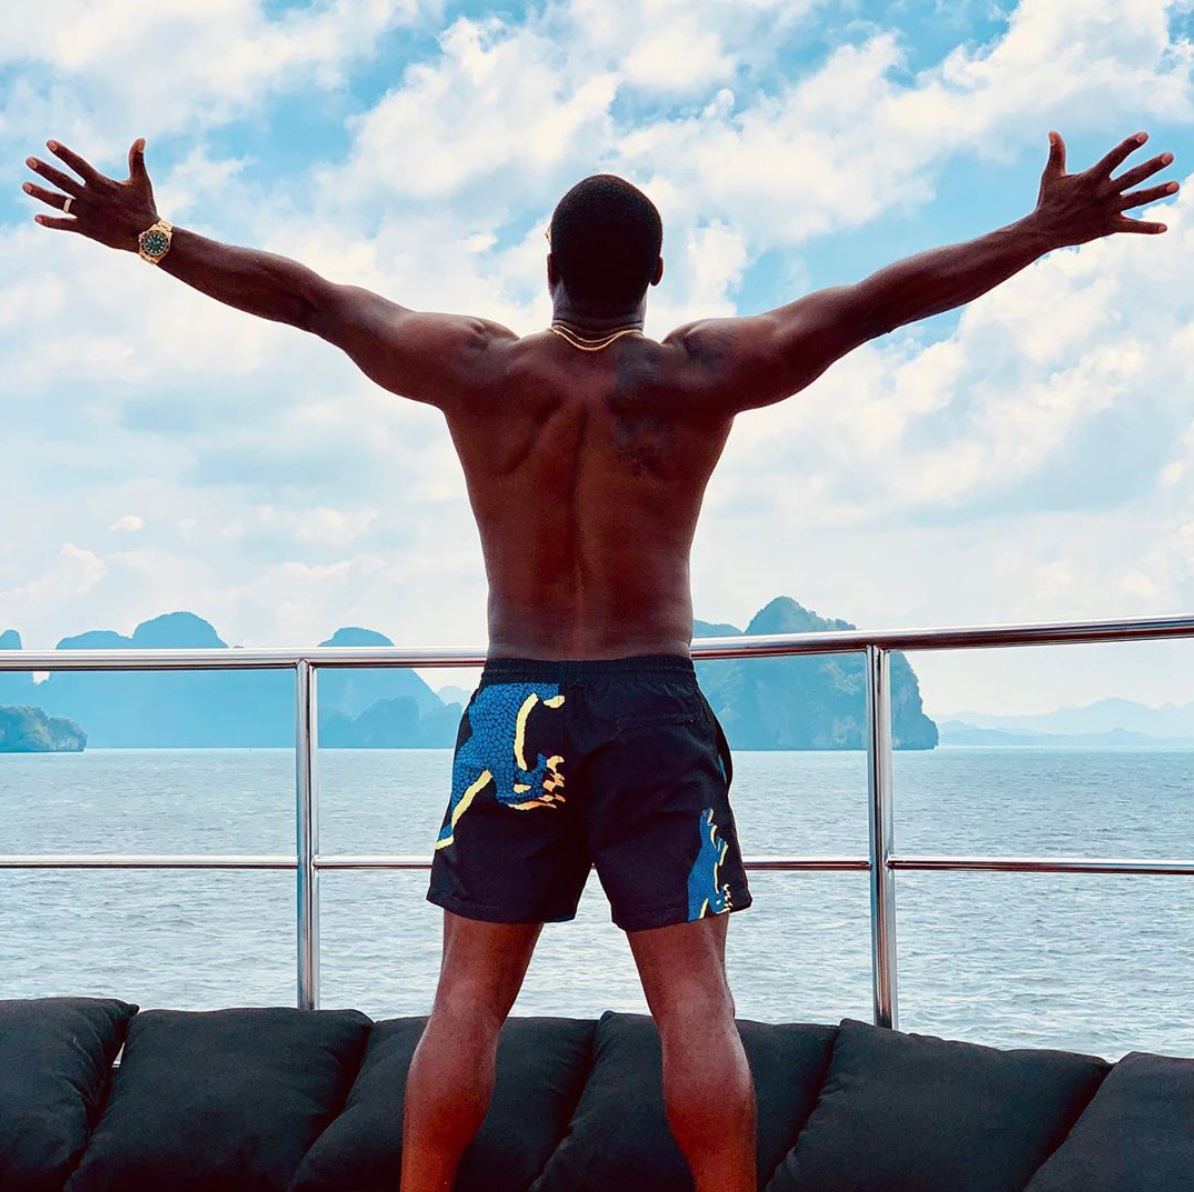 Kevin and Eniko Hart's Thailand Getaway Is Straight Travel Squad Goals